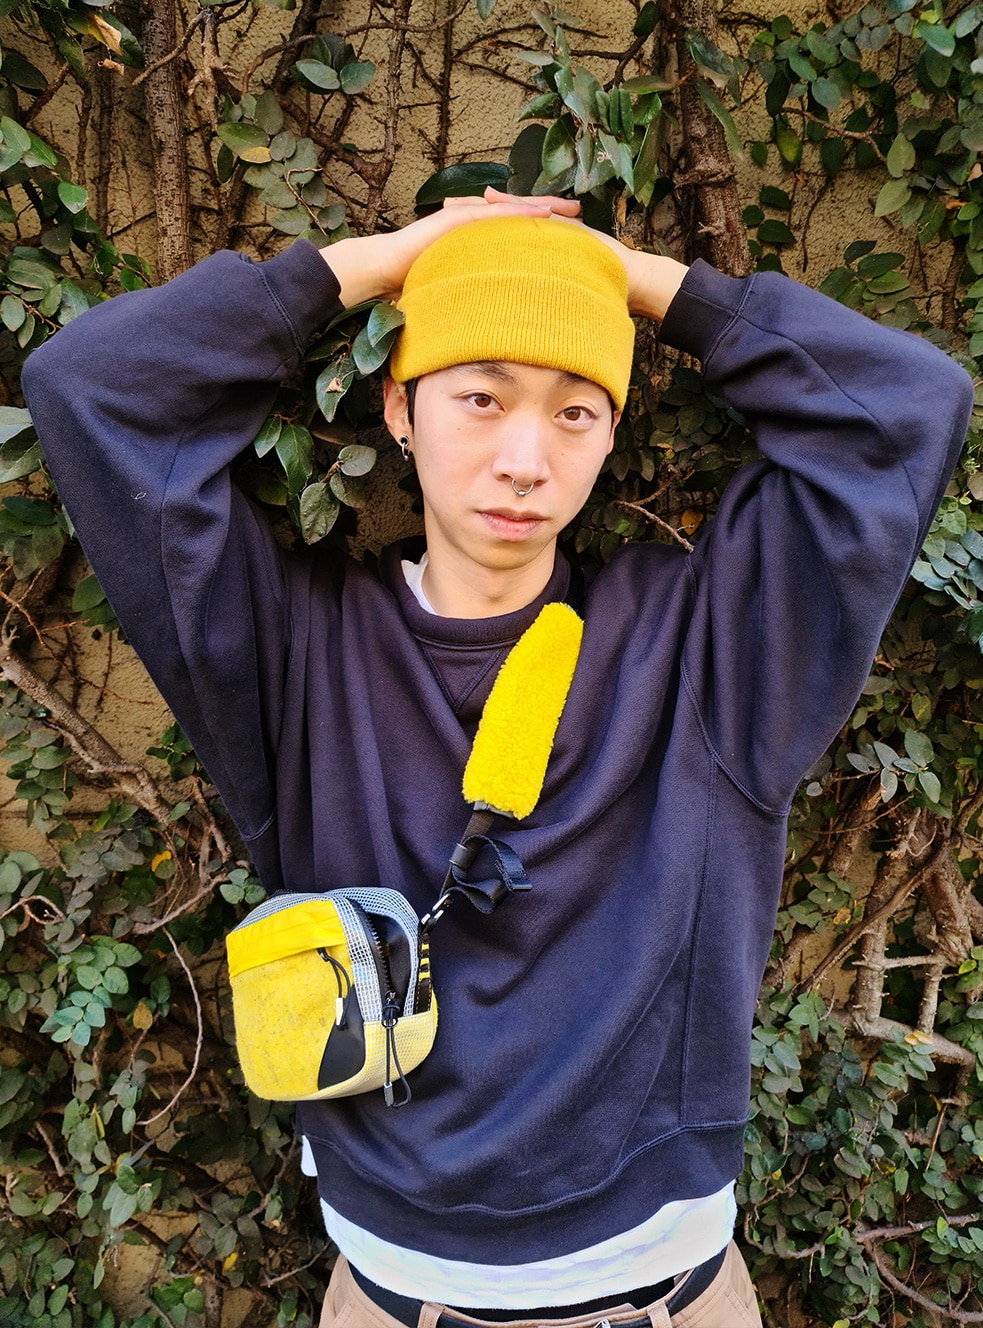 A man is posing in the background of plants wearing a navy blue clothe with a yellow hat and a bag as a point.